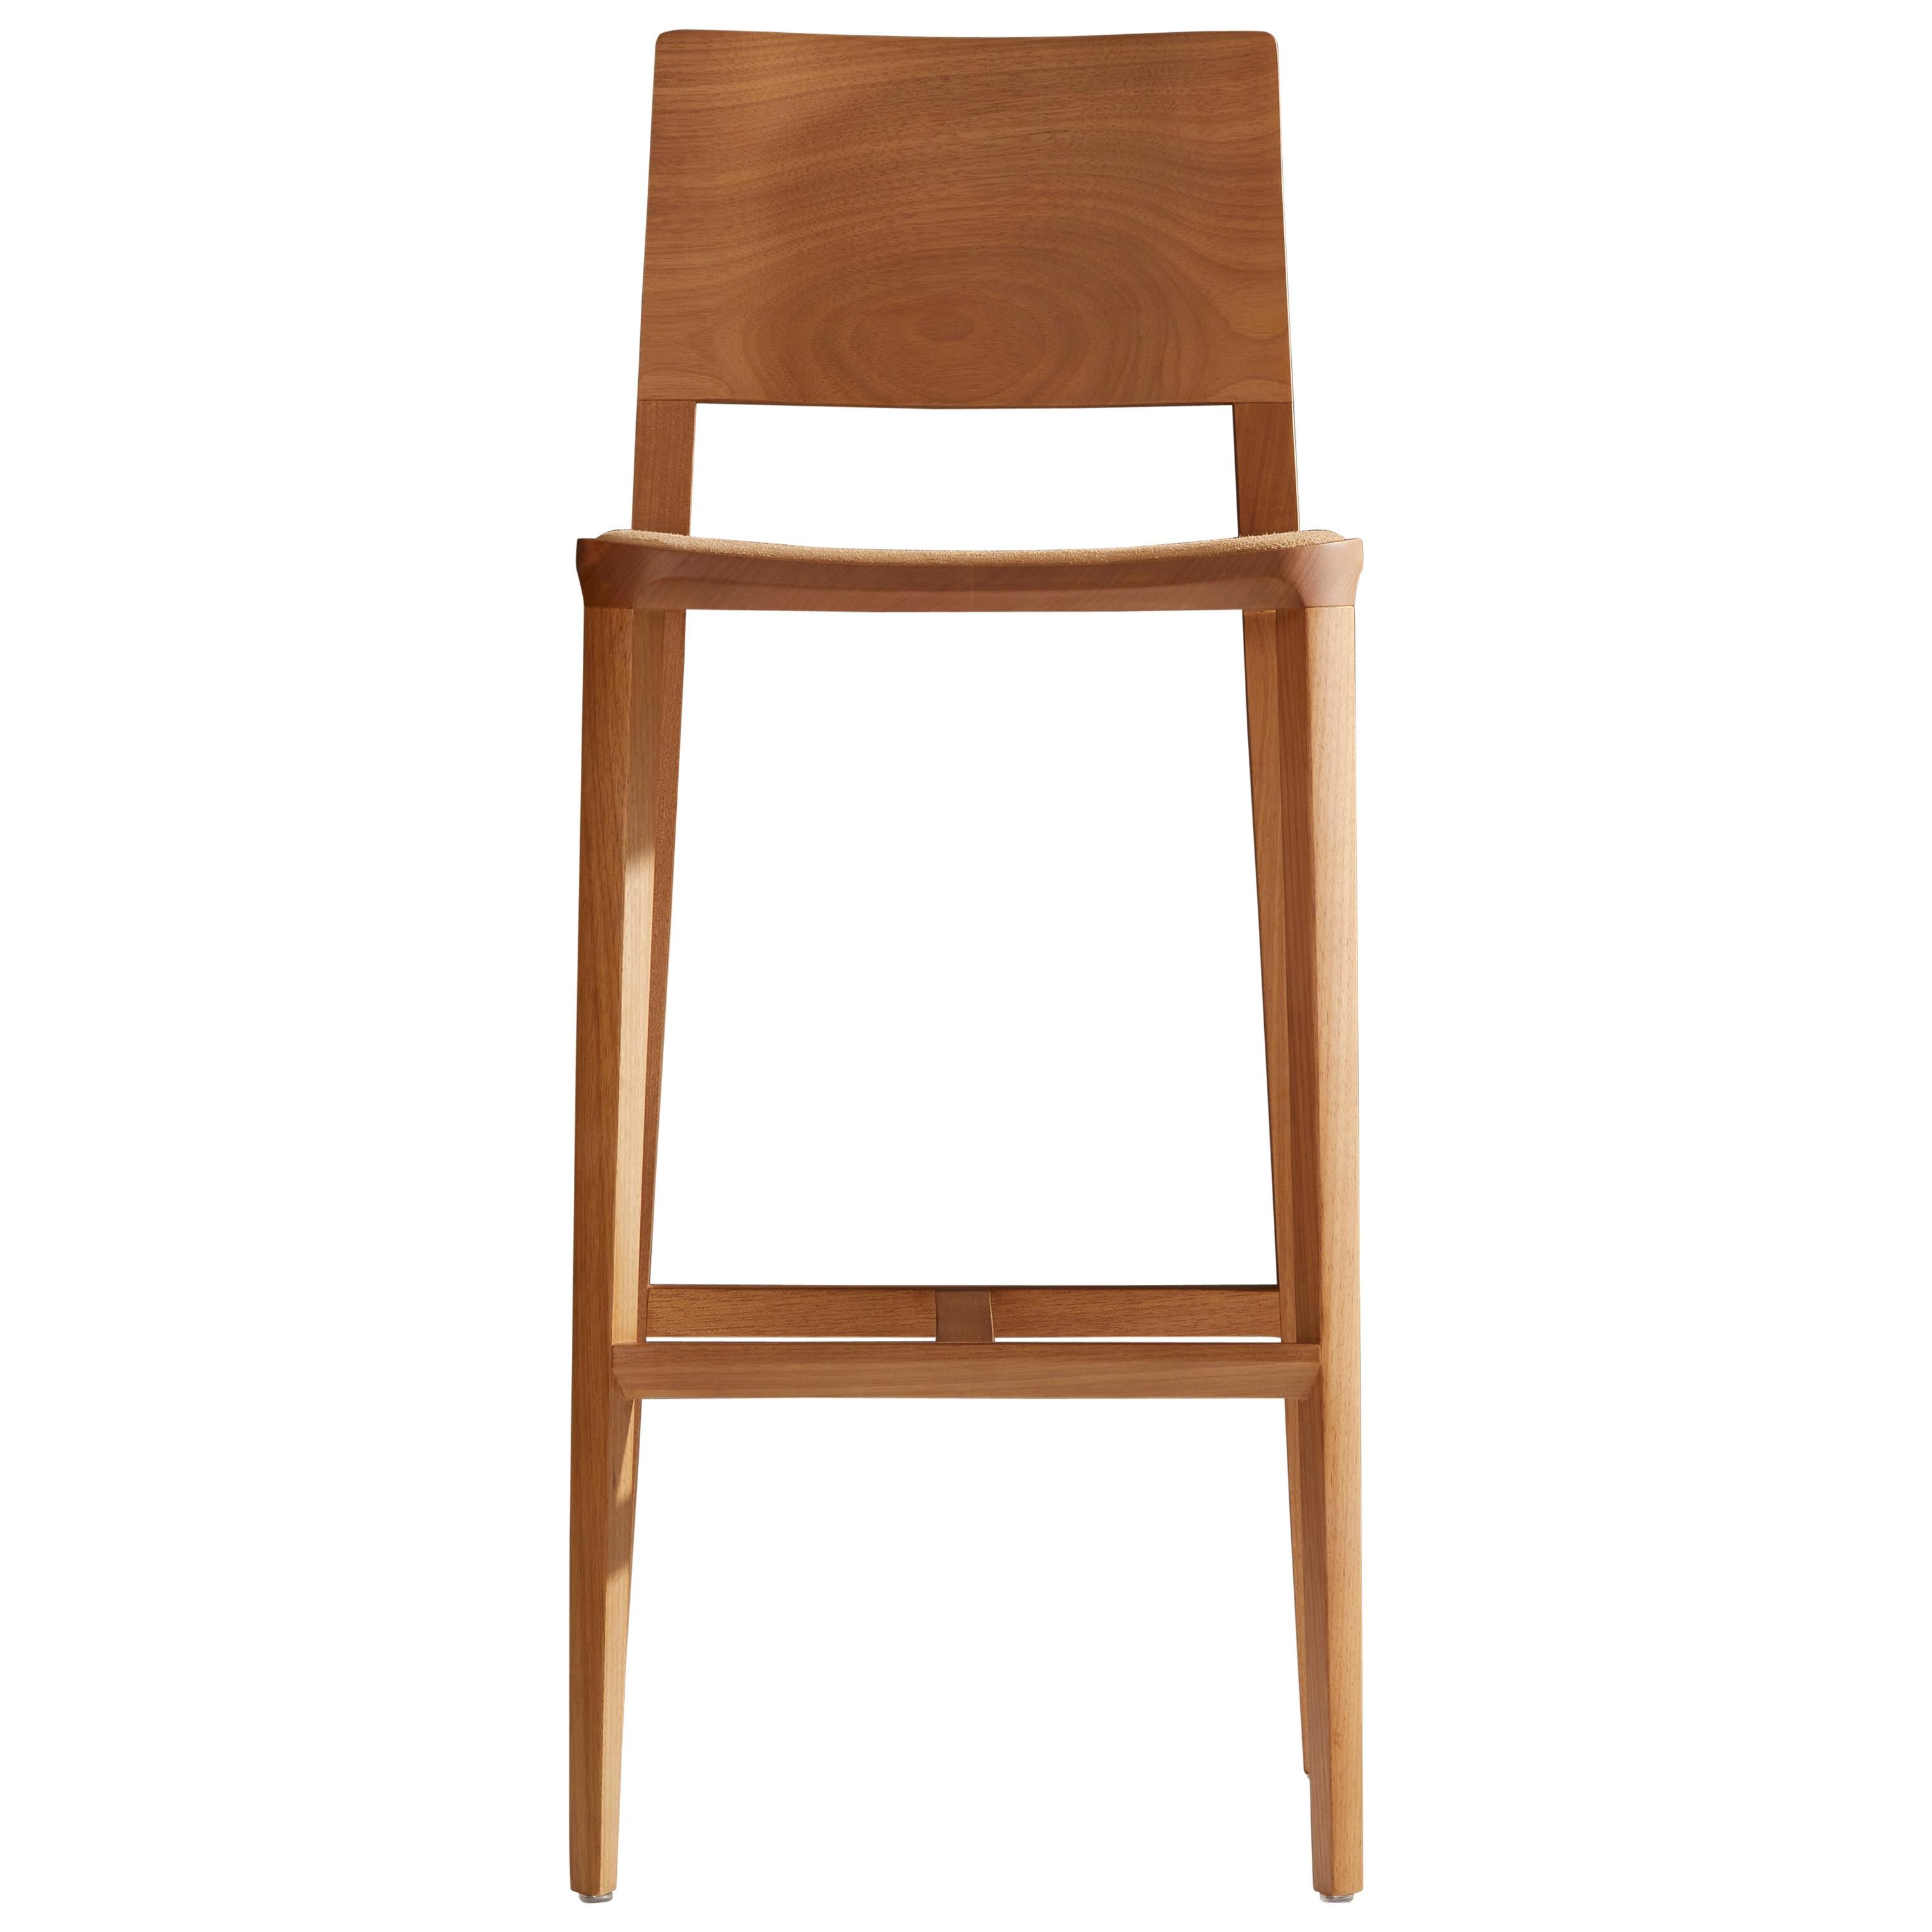 Minimalist Style, Stool in Natural Solid Wood, Leather Seating